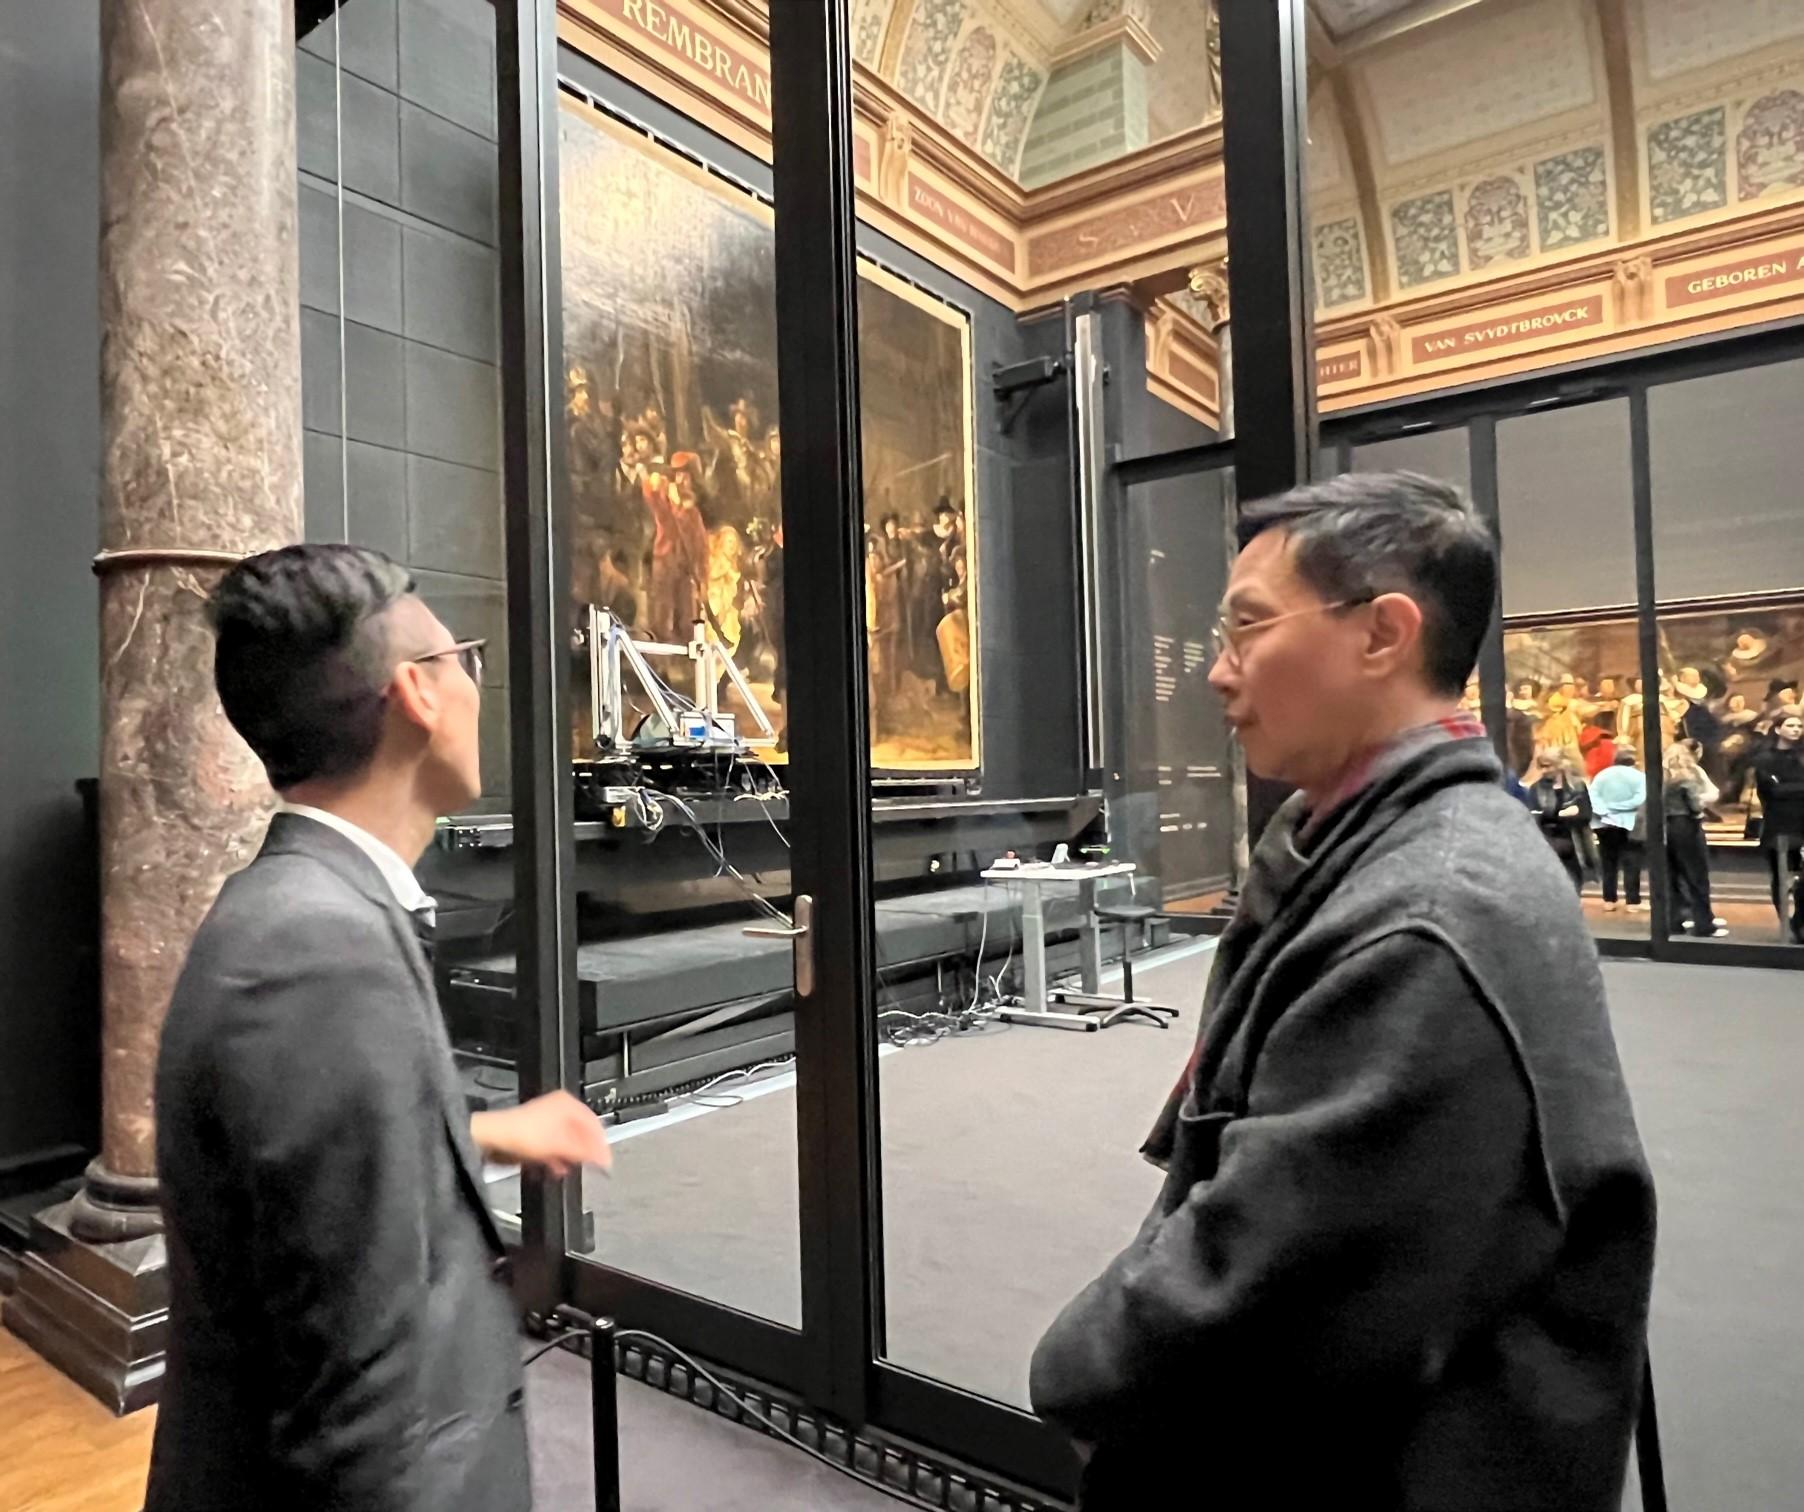 The Secretary for Culture, Sports and Tourism, Mr Kevin Yeung (right), visited the Rijksmuseum yesterday (March 28, Amsterdam time) to observe the conservation of artworks.
